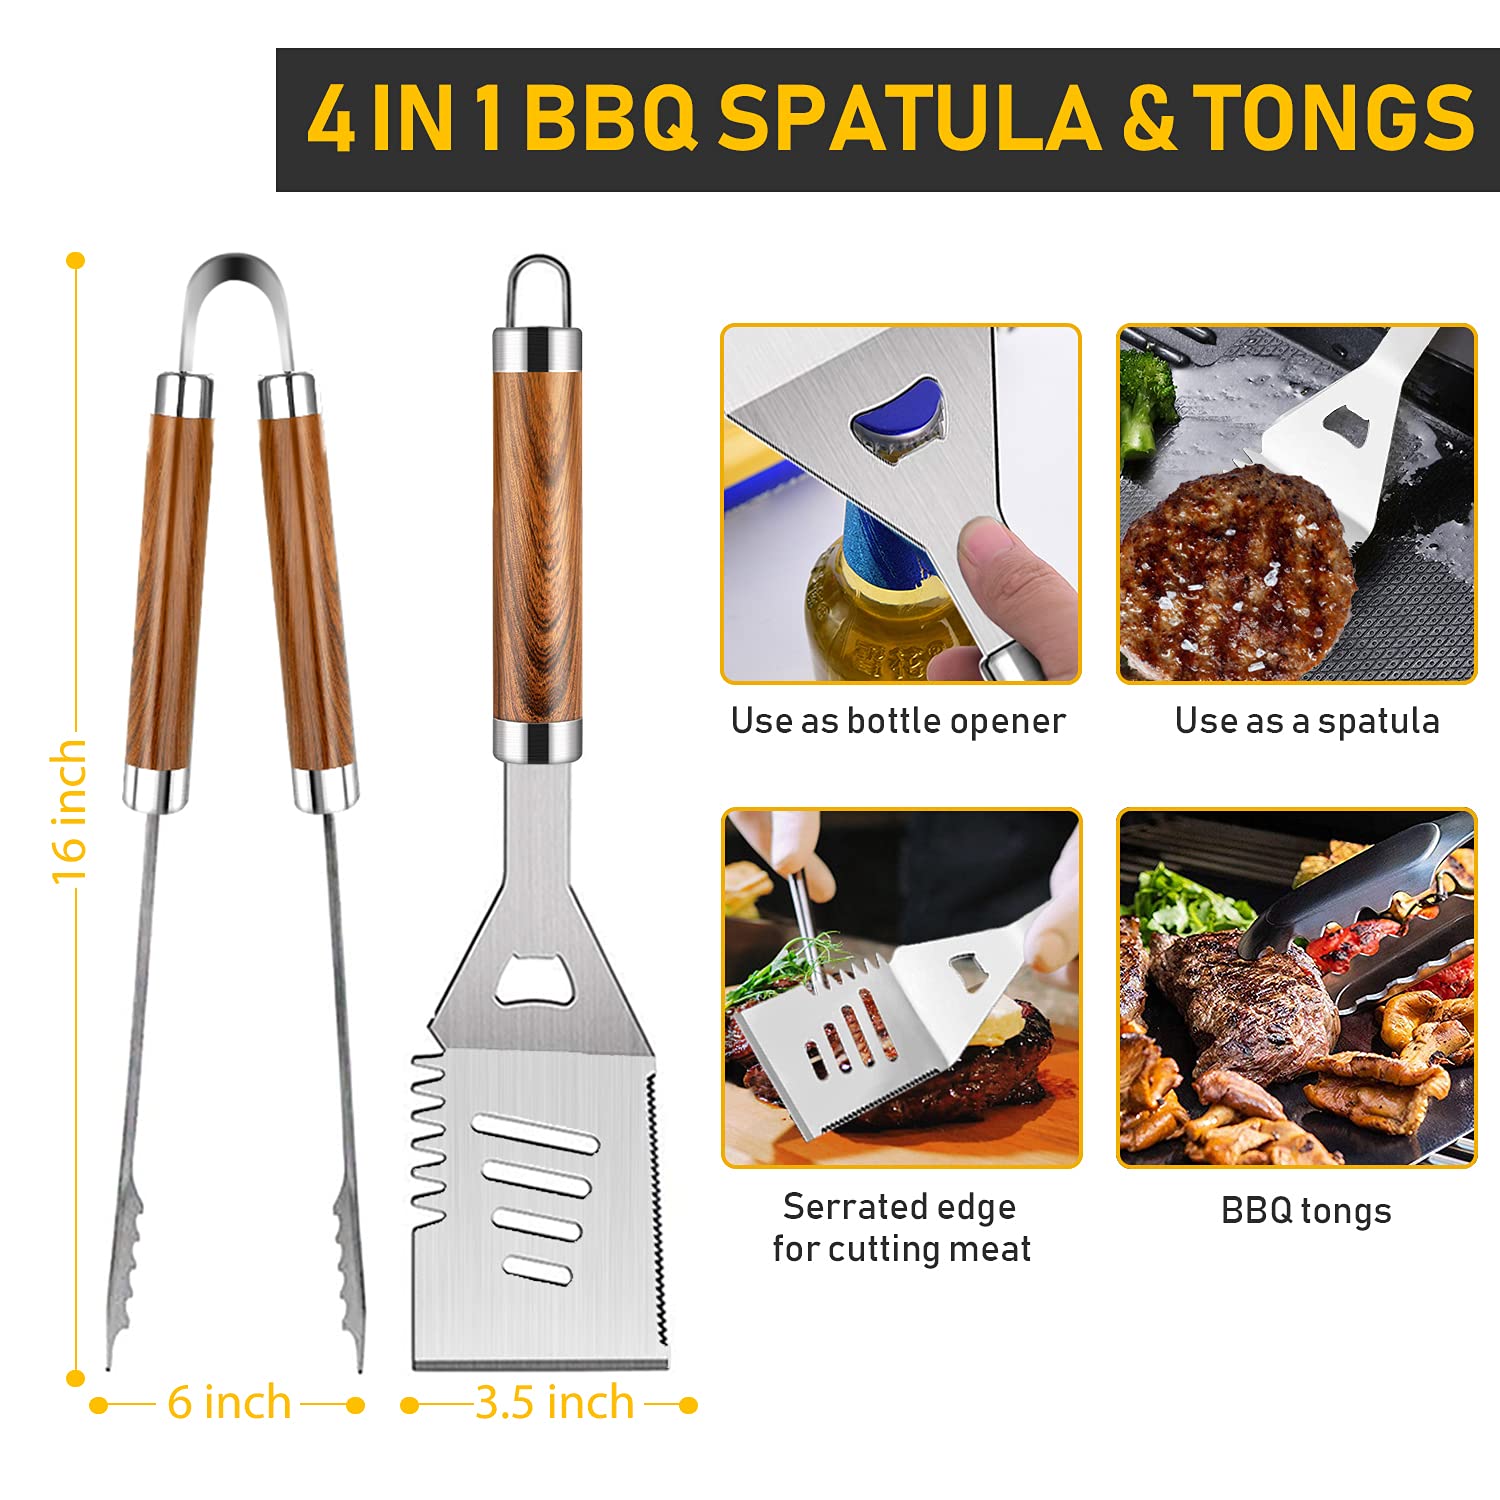 34Pcs Grill Accessories Grilling Gifts for Men, 16 Inches Heavy Duty BBQ Accessories, Stainless Steel Grill Tools with Thermometer, Grill Mats for Backyard, BBQ Gifts Set for Father's Day - image 3 of 7